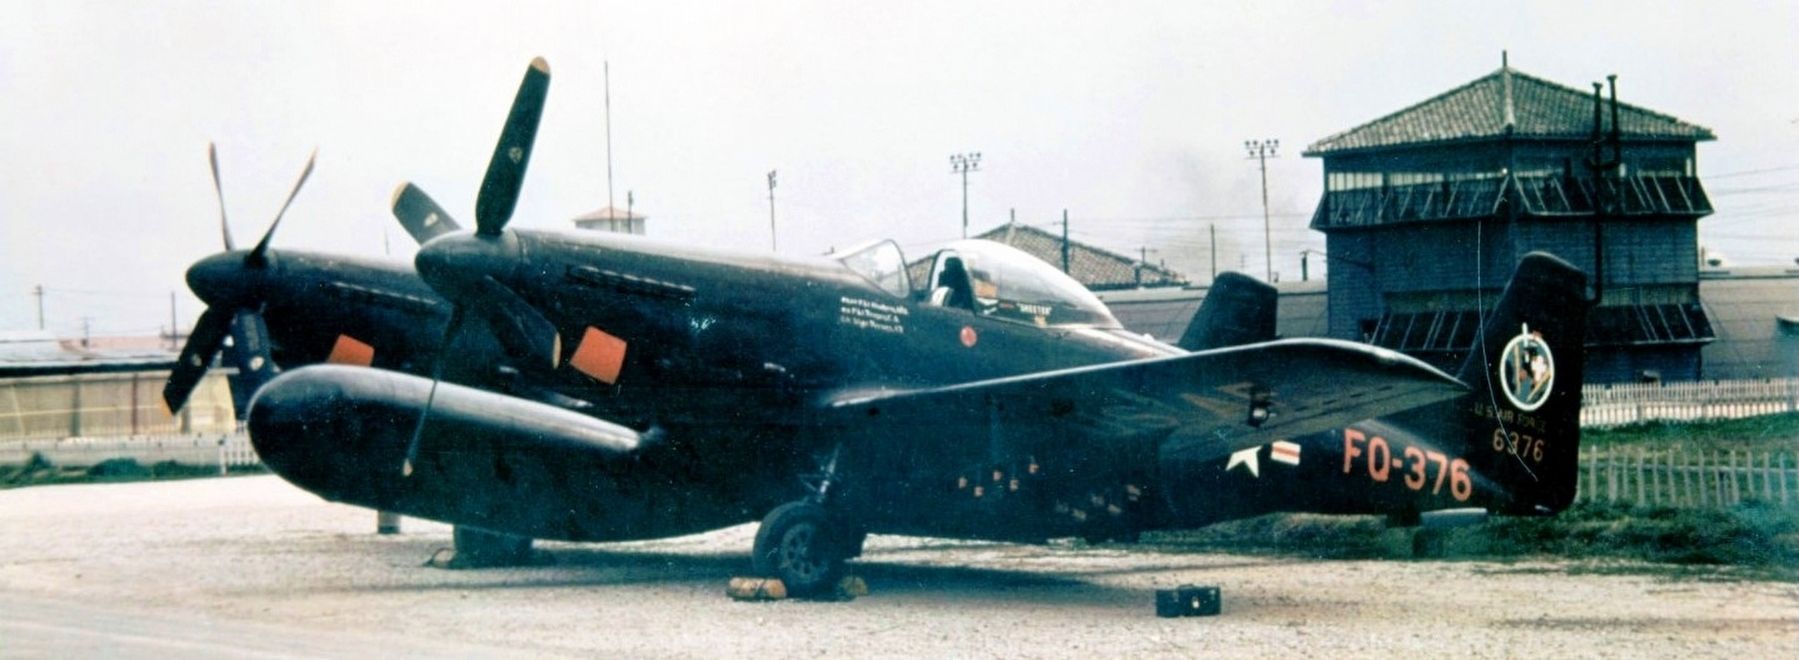 68th Fighter All Weather Squadron F-82G Twin Mustang 46-376 based at Itazuke AB, 1950 image. Click for full size.